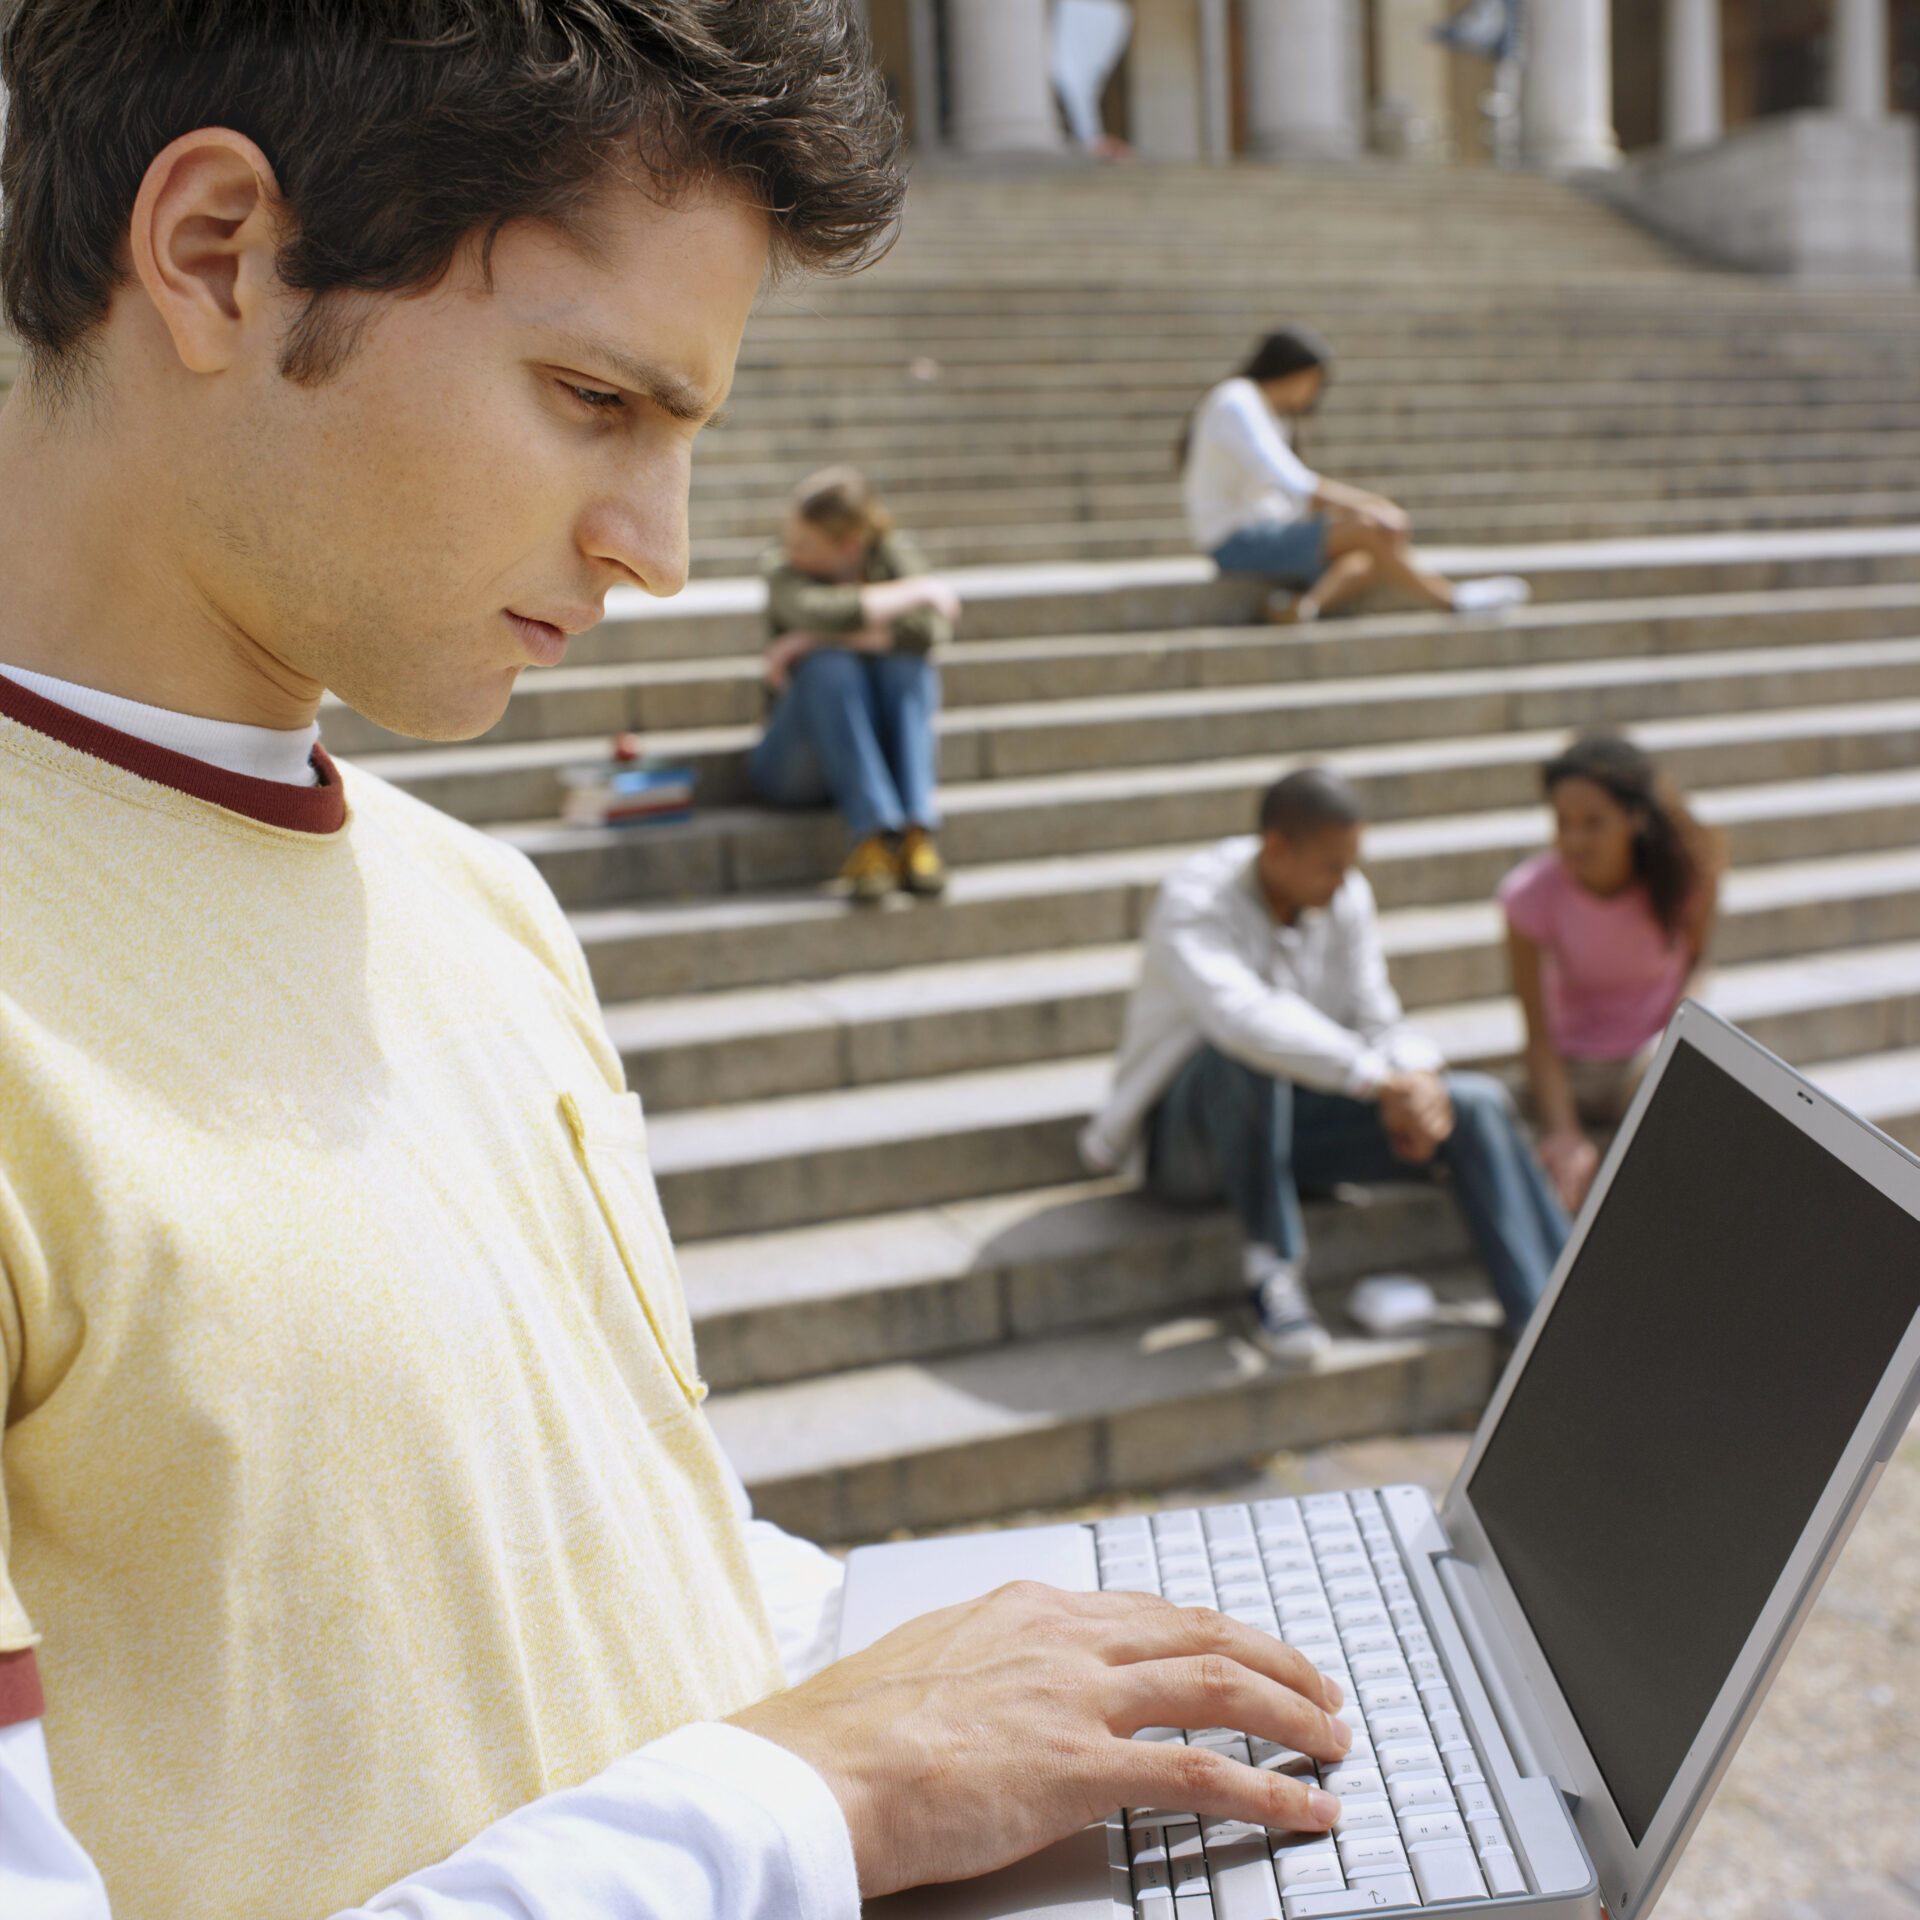 Close-up of a college student working on his laptop on campus with other students in the background